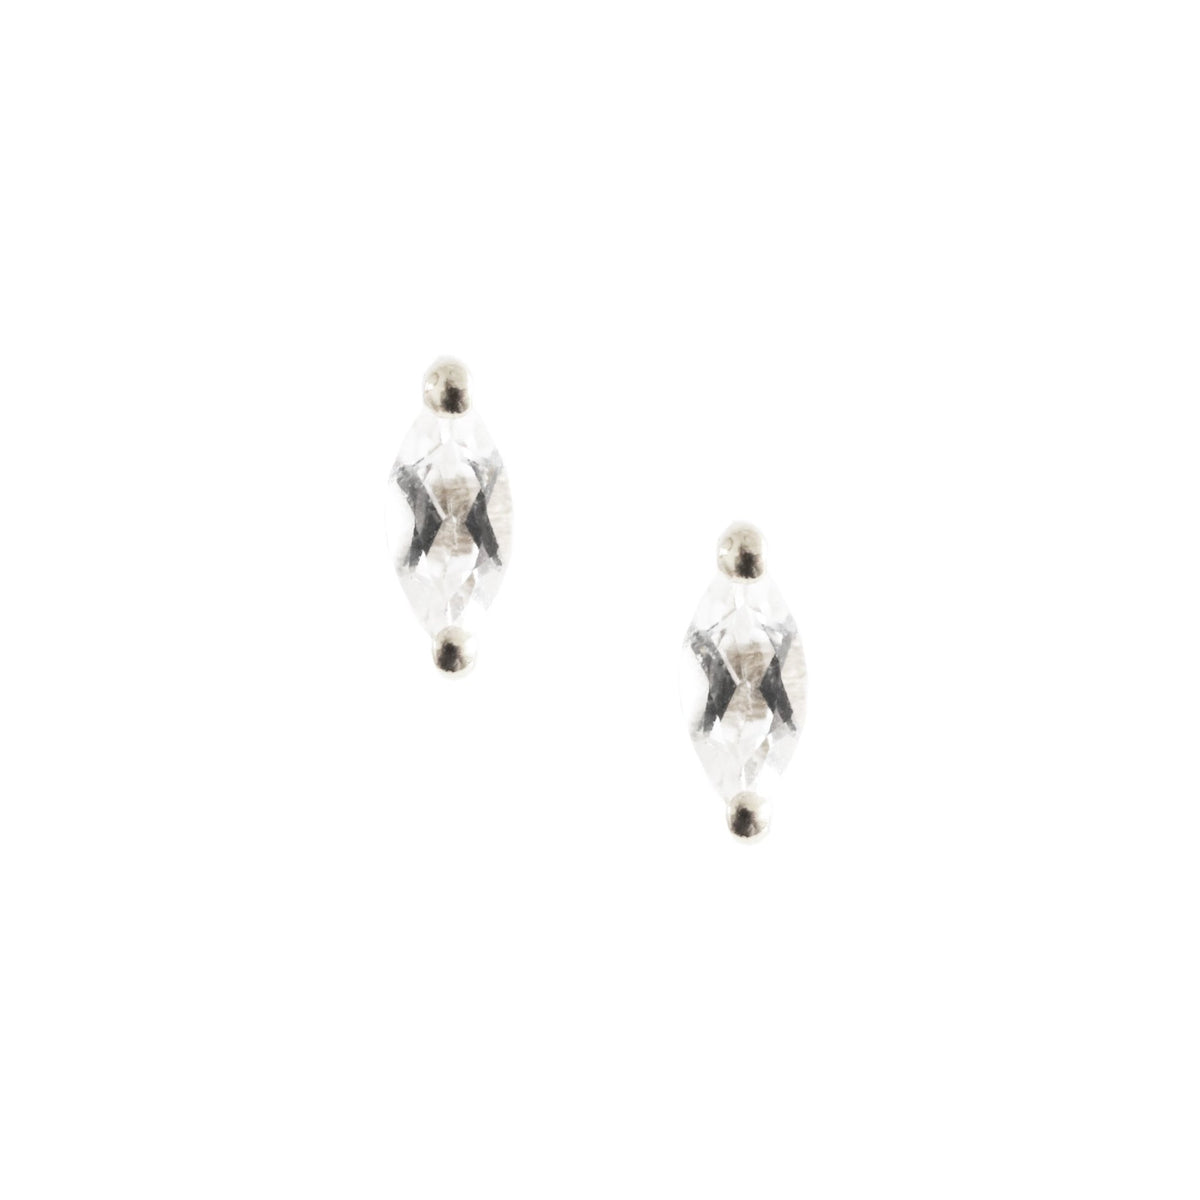 TINY LOVE MARQUIESE STUDS - WHITE TOPAZ &amp; SILVER - SO PRETTY CARA COTTER